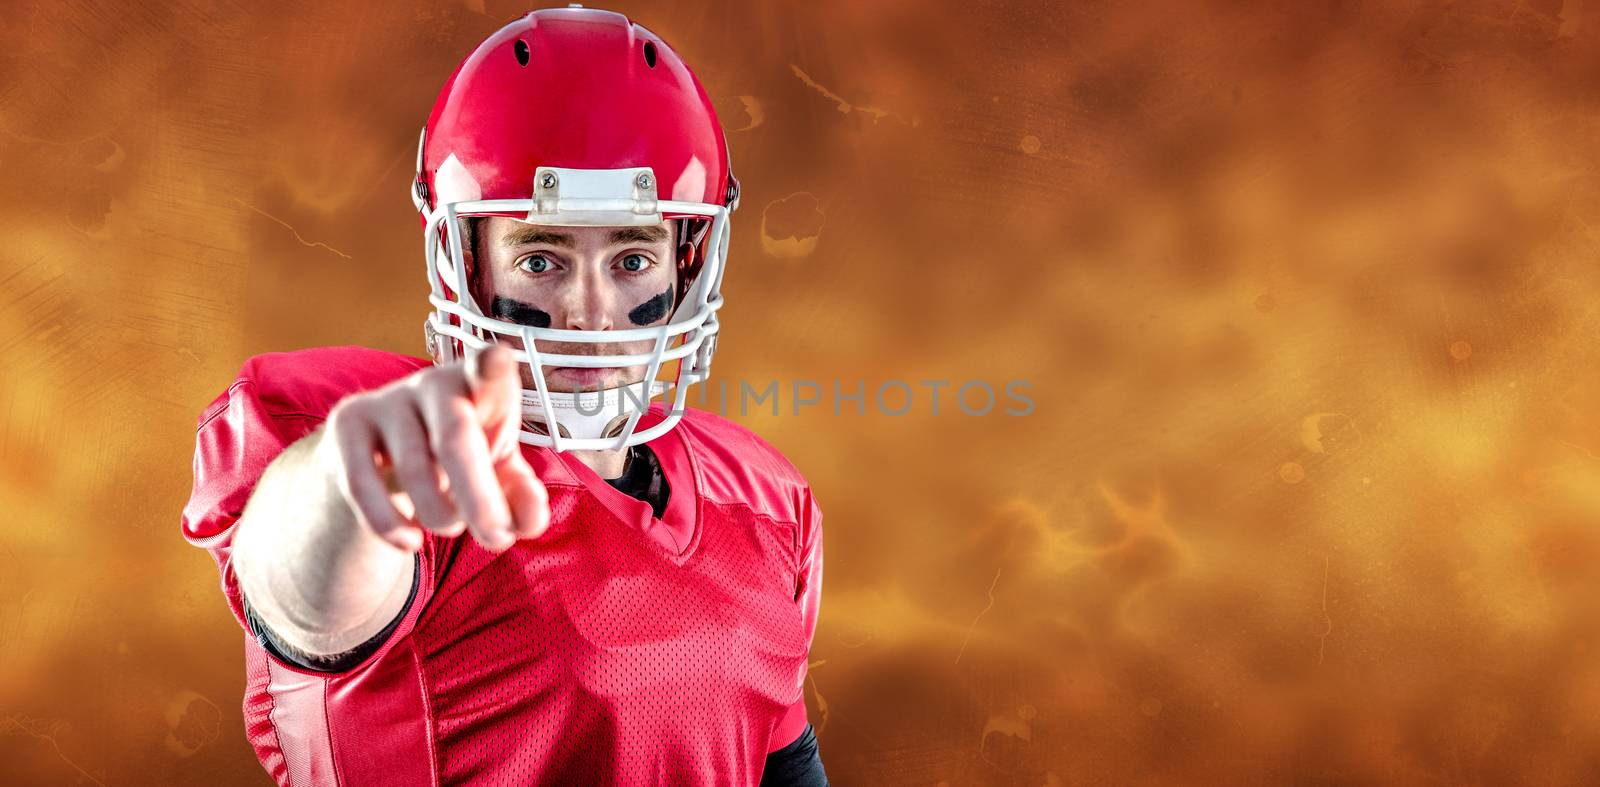 Portrait of american football player pointing to camera against orange background